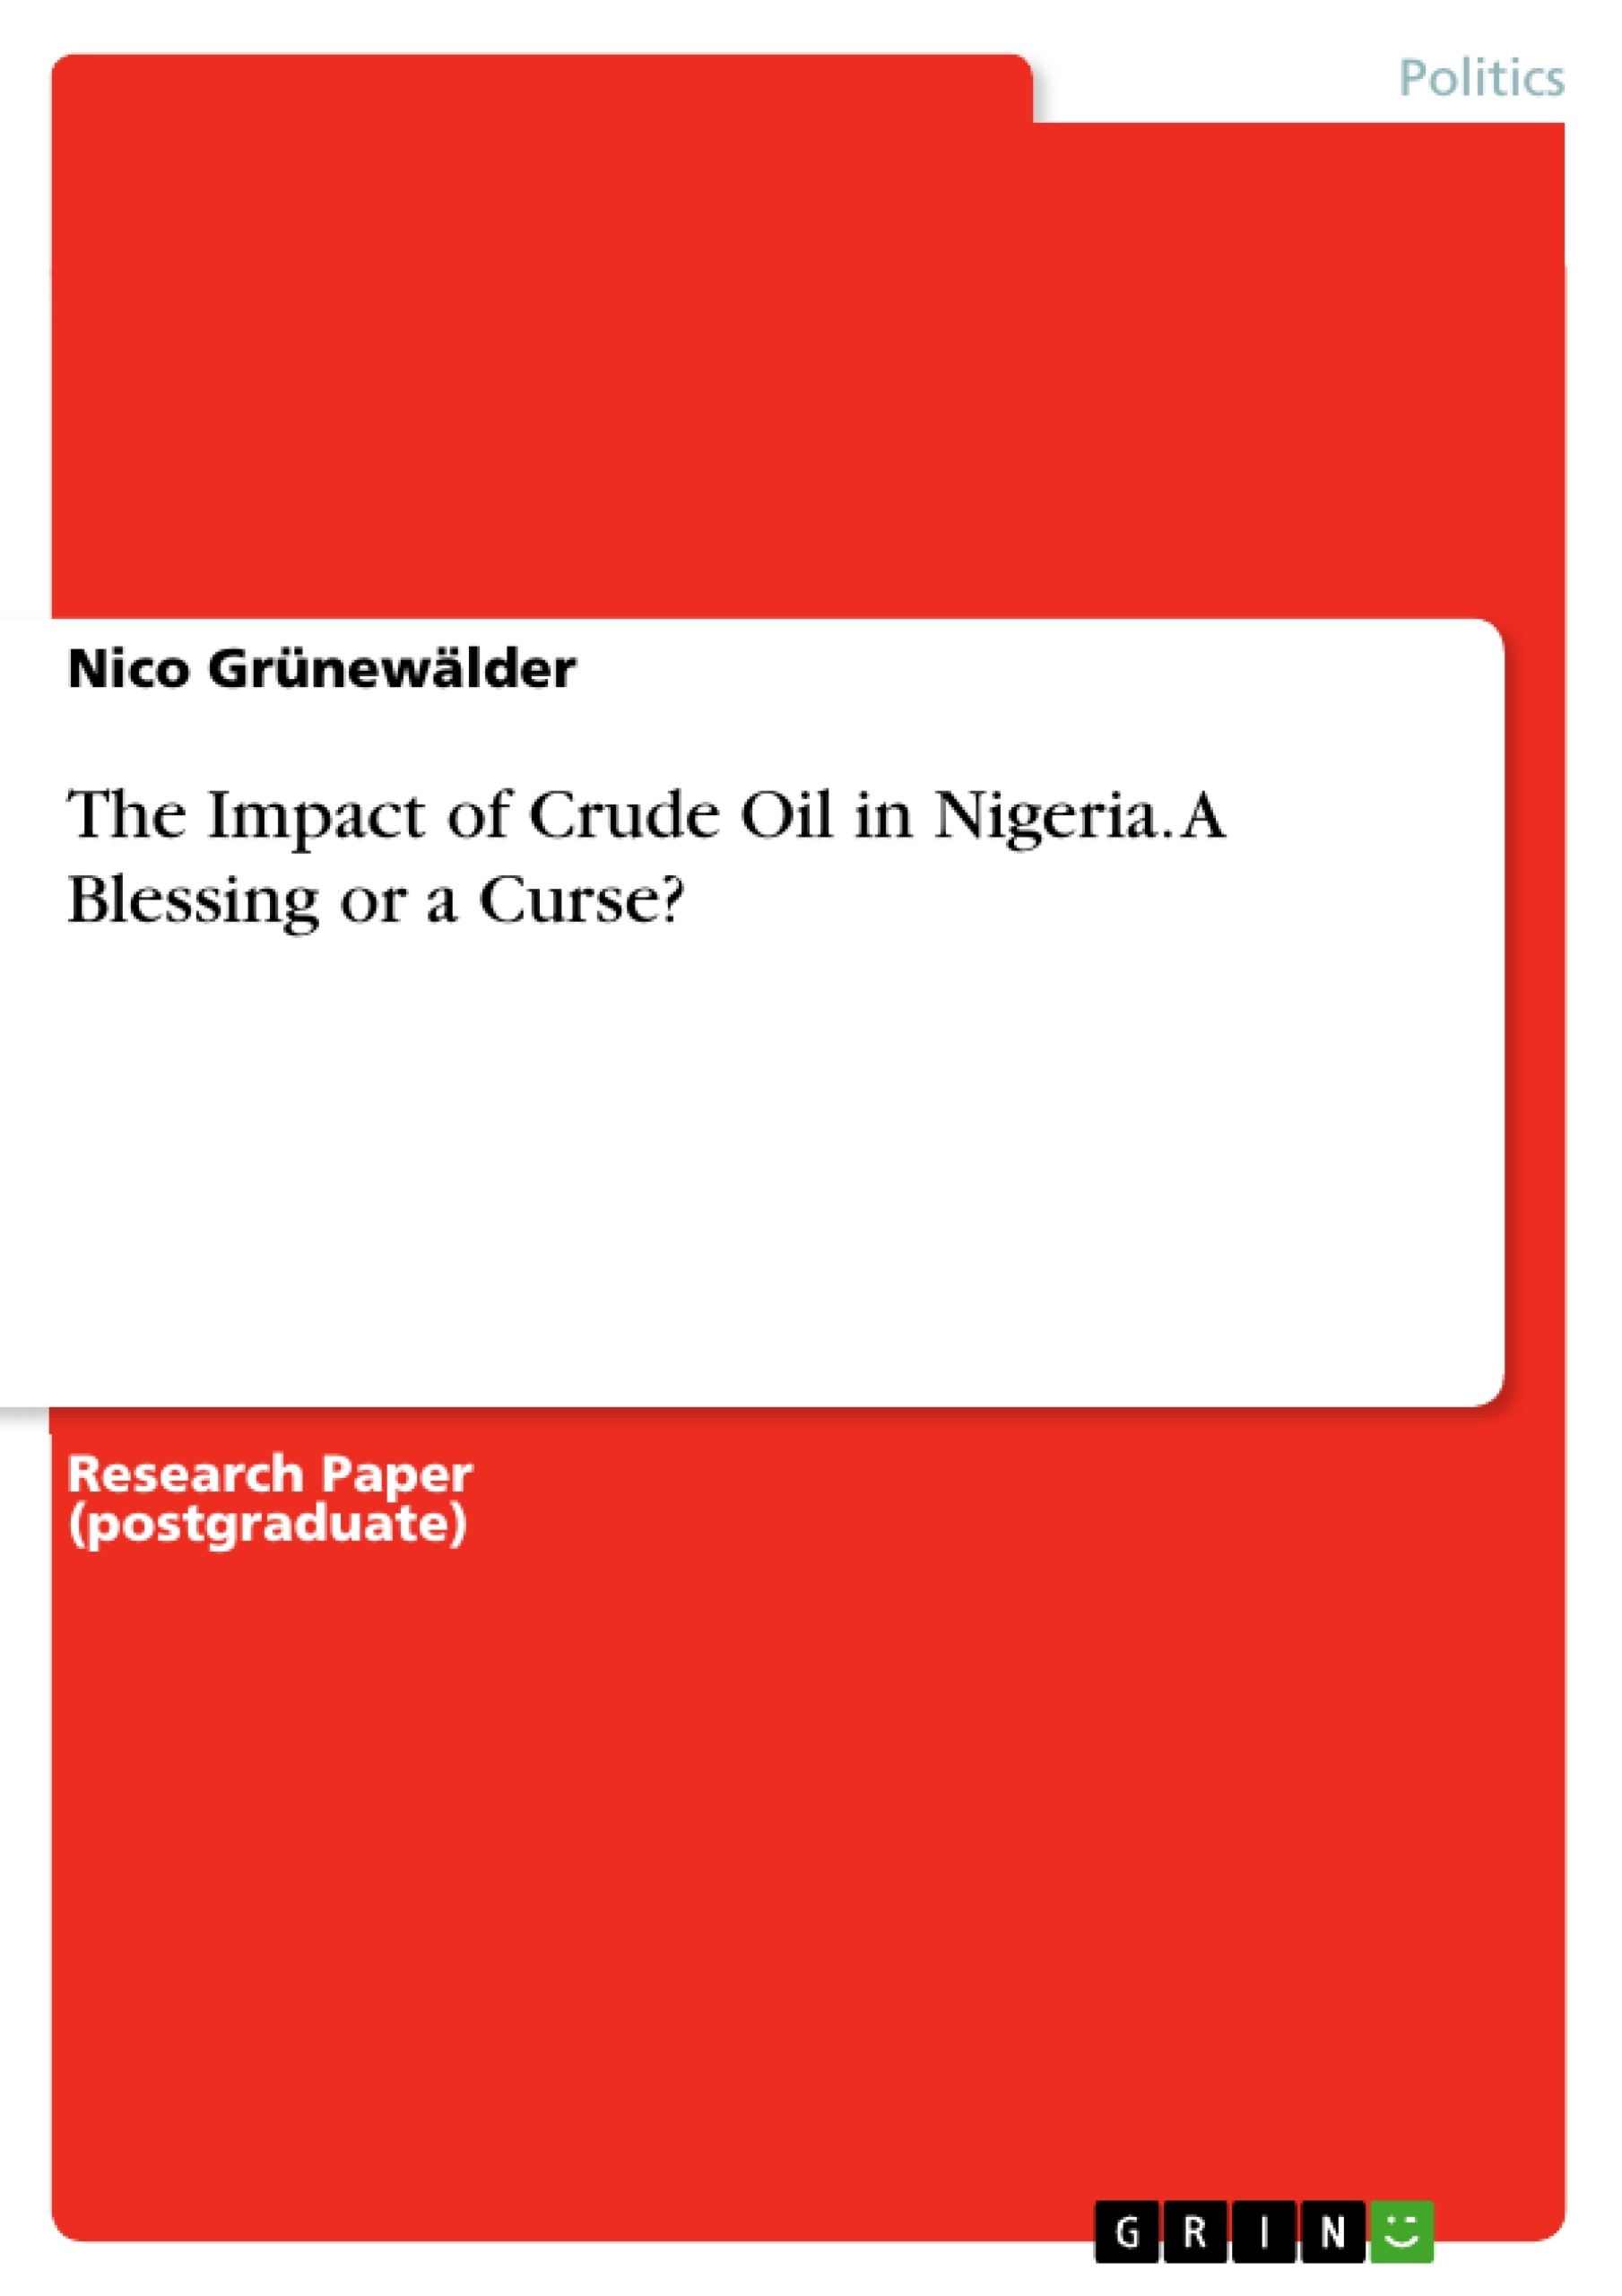 Title: The Impact of Crude Oil in Nigeria. A Blessing or a Curse?